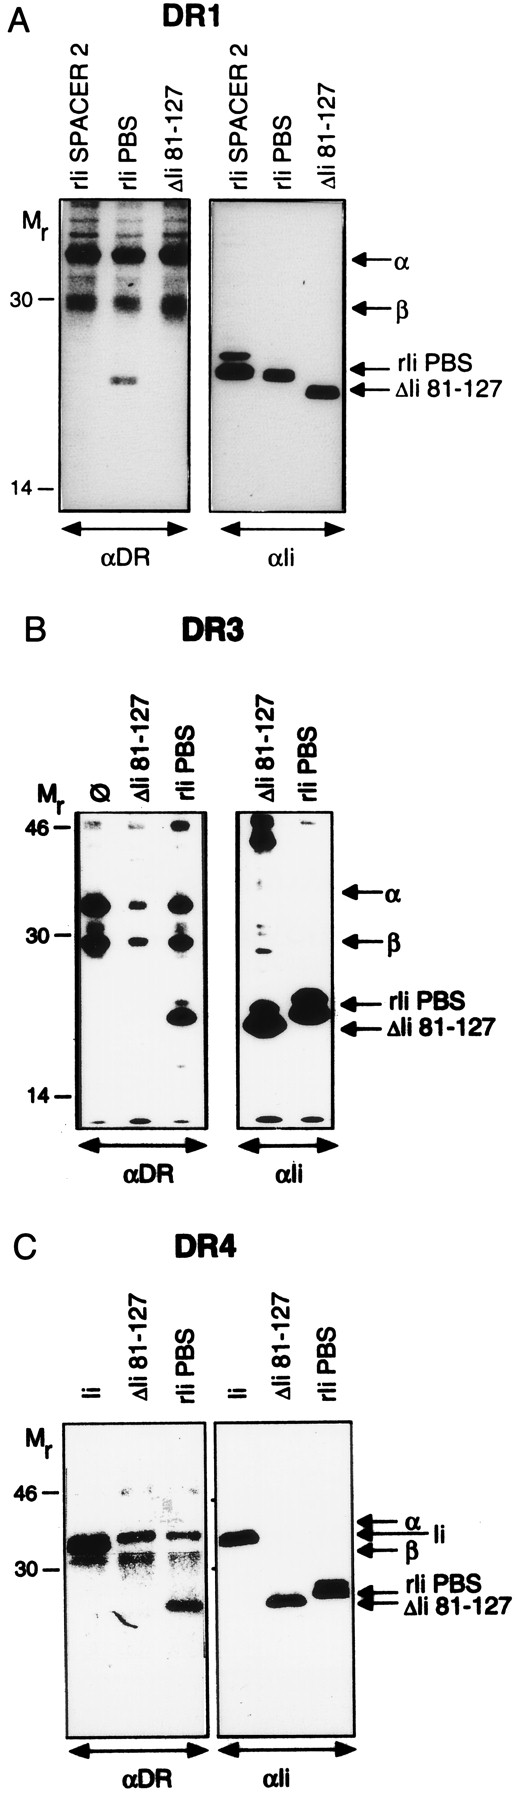 FIGURE 5. In the absence of the groove-binding segment of Ii, the sequence aa 81–87 restores binding to different DR allotypes. COS1 cells were transfected, radiolabeled, lysed, and immunoprecipitated with mAbs specific for DR (ISCR3 and I251SB) and against Ii (In1). DR (left) or Ii (right) immunoprecipitates from COS1 transfectants expressing various combinations of DR1 (A), DR3 (B), or DR4 (C) and Ii, ΔIi81-127, rIi PBSite, or rIi spacer 2 are shown. In lane φ, DR without Ii was transfected. Positions of the DR α- and β-chains and the Ii derivatives are indicated on the right. Migration of m.w. markers (Mr) is shown on the left.